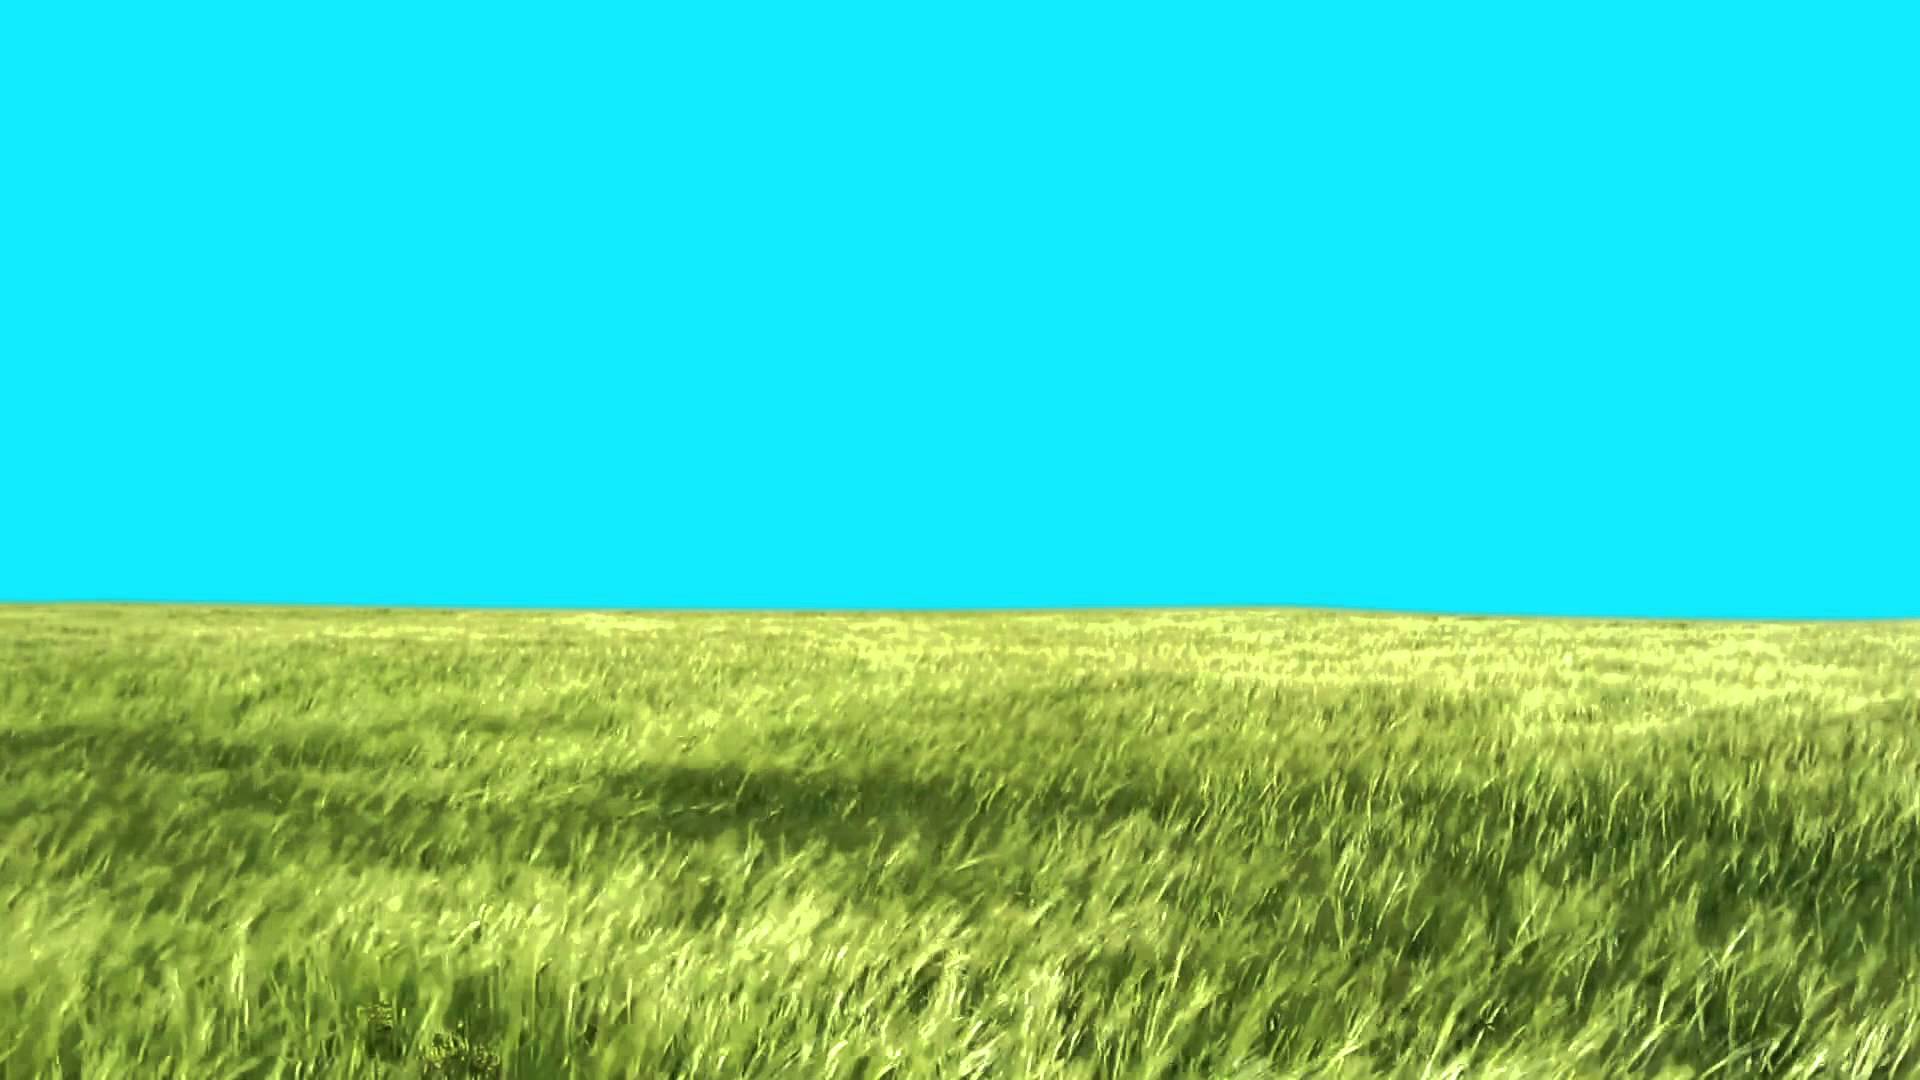 Green Screen Lawn High Grass moves with the wind HD - Footage ...